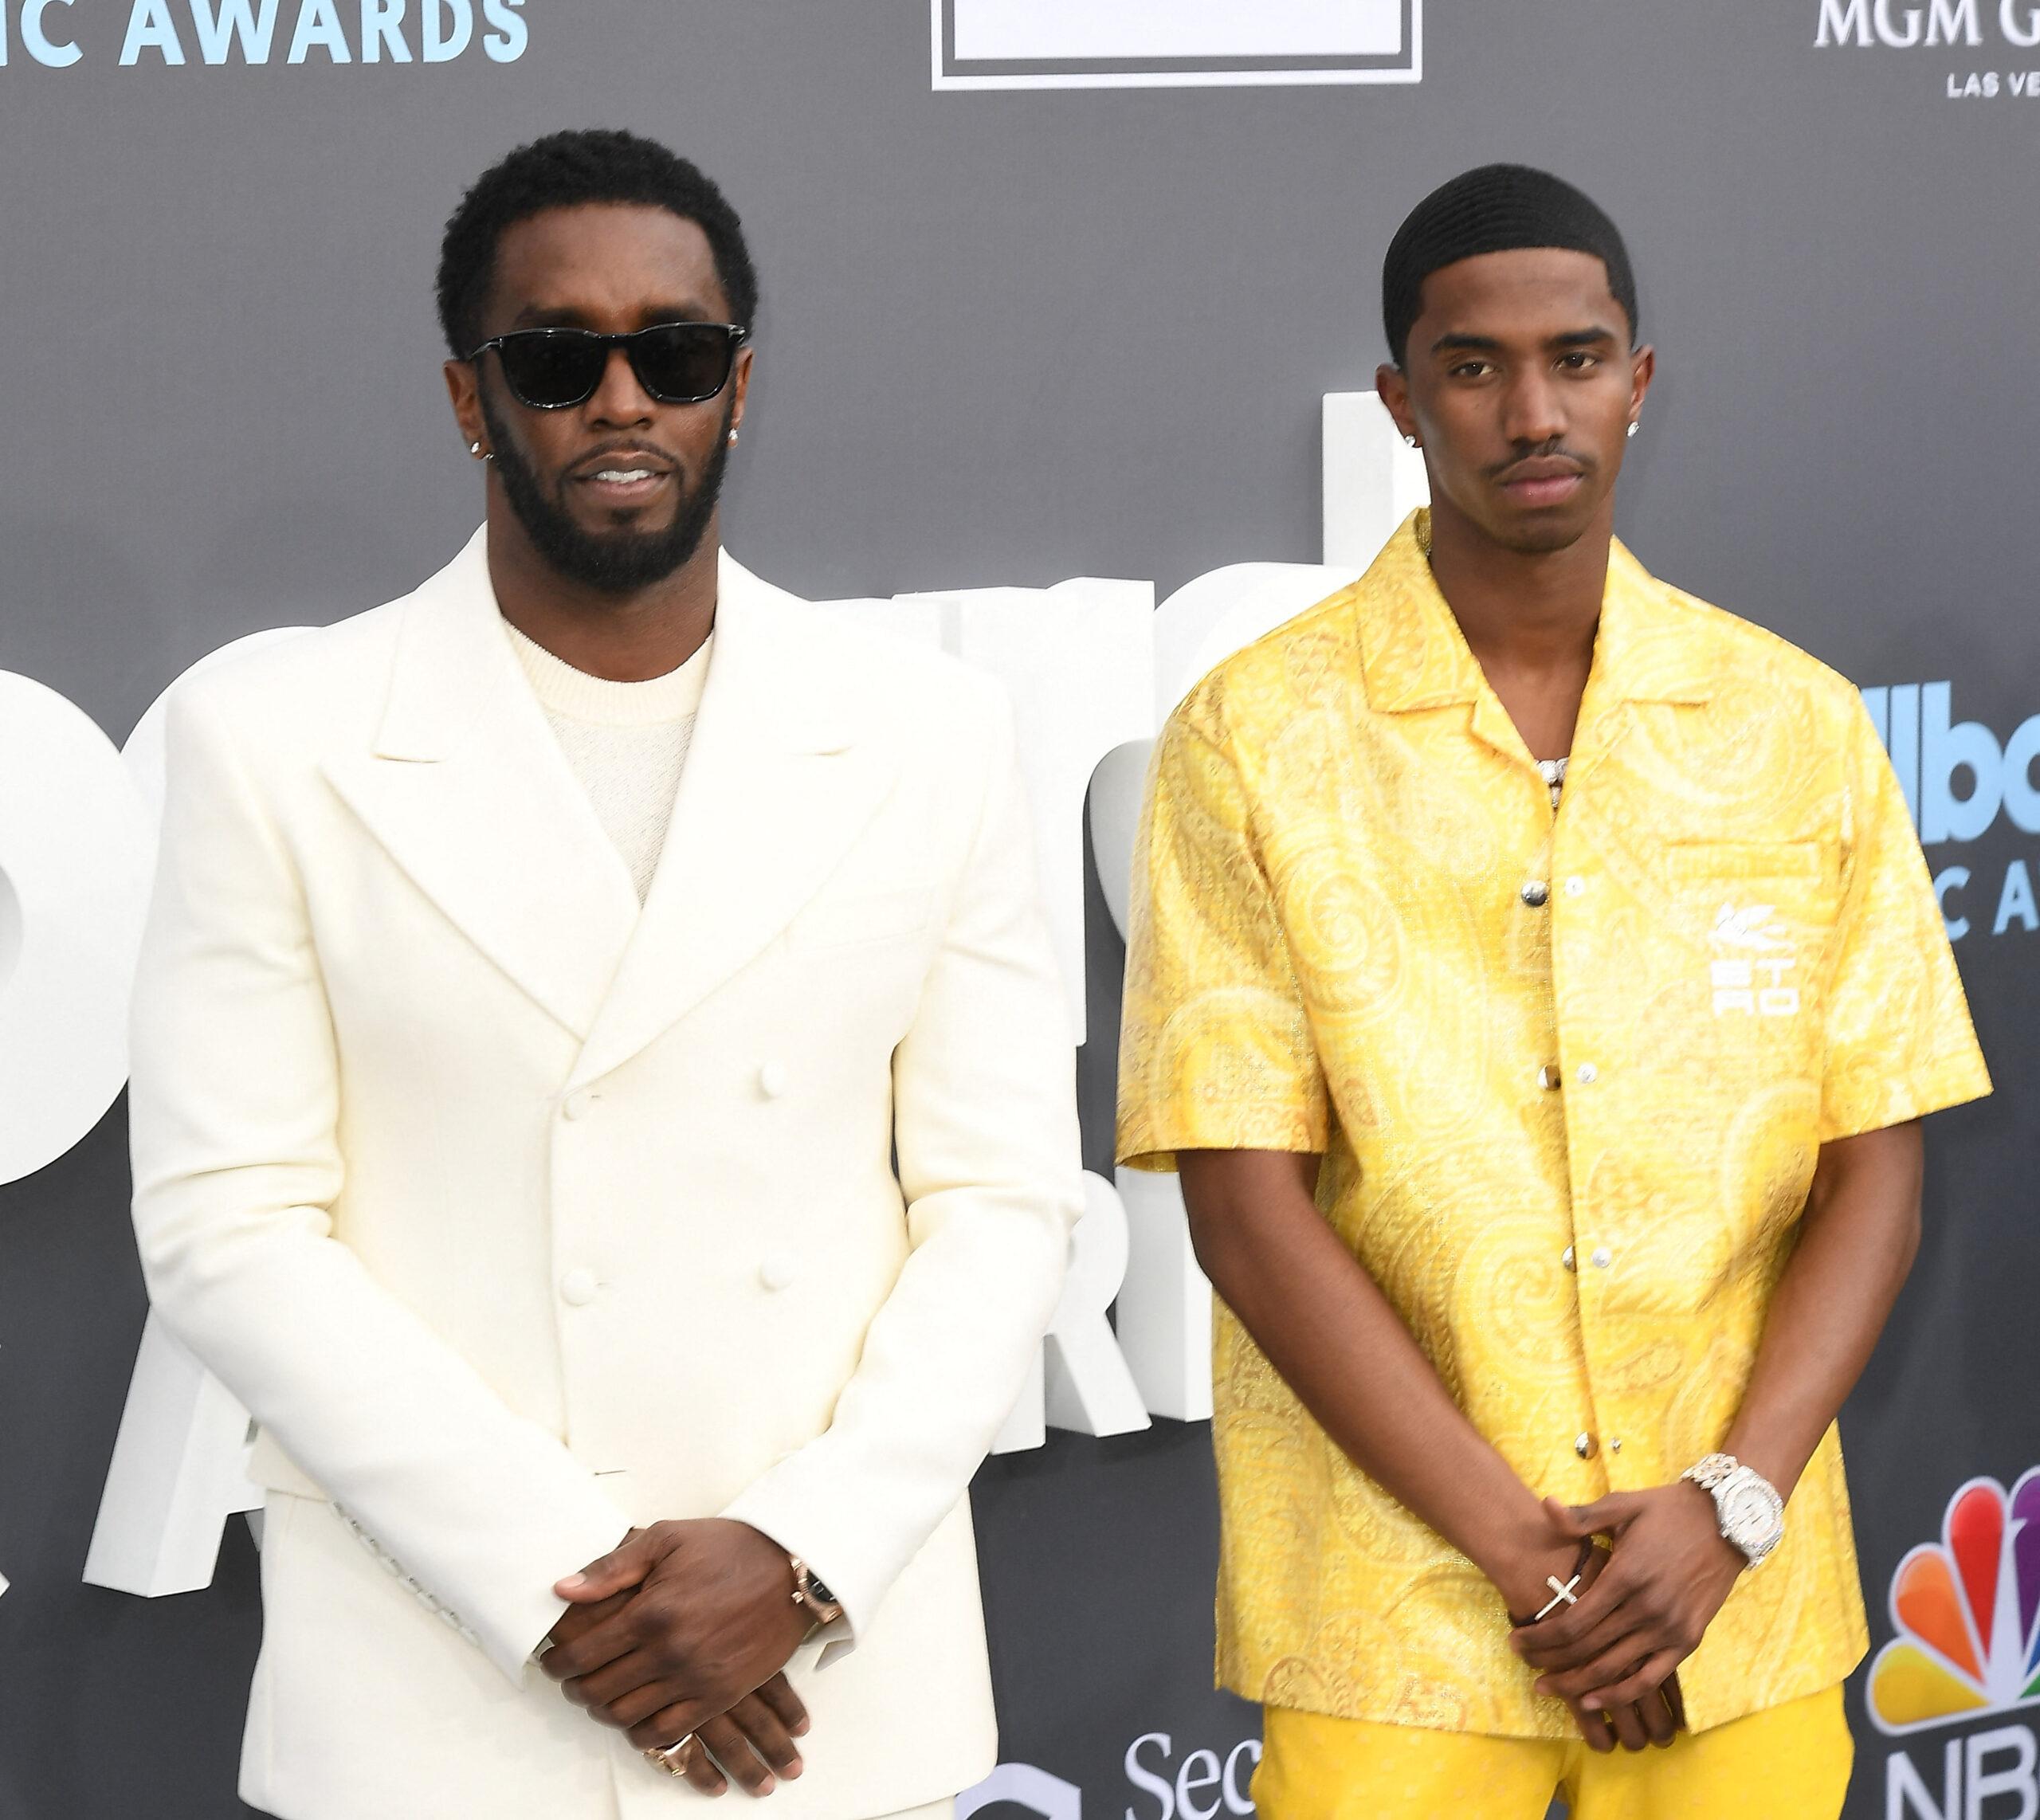 Diddy and his son at the 2022 Billboard Music Awards held at the MGM Grand Garden Arena on May 15, 2022 in Las Vegas, Nevada, United States